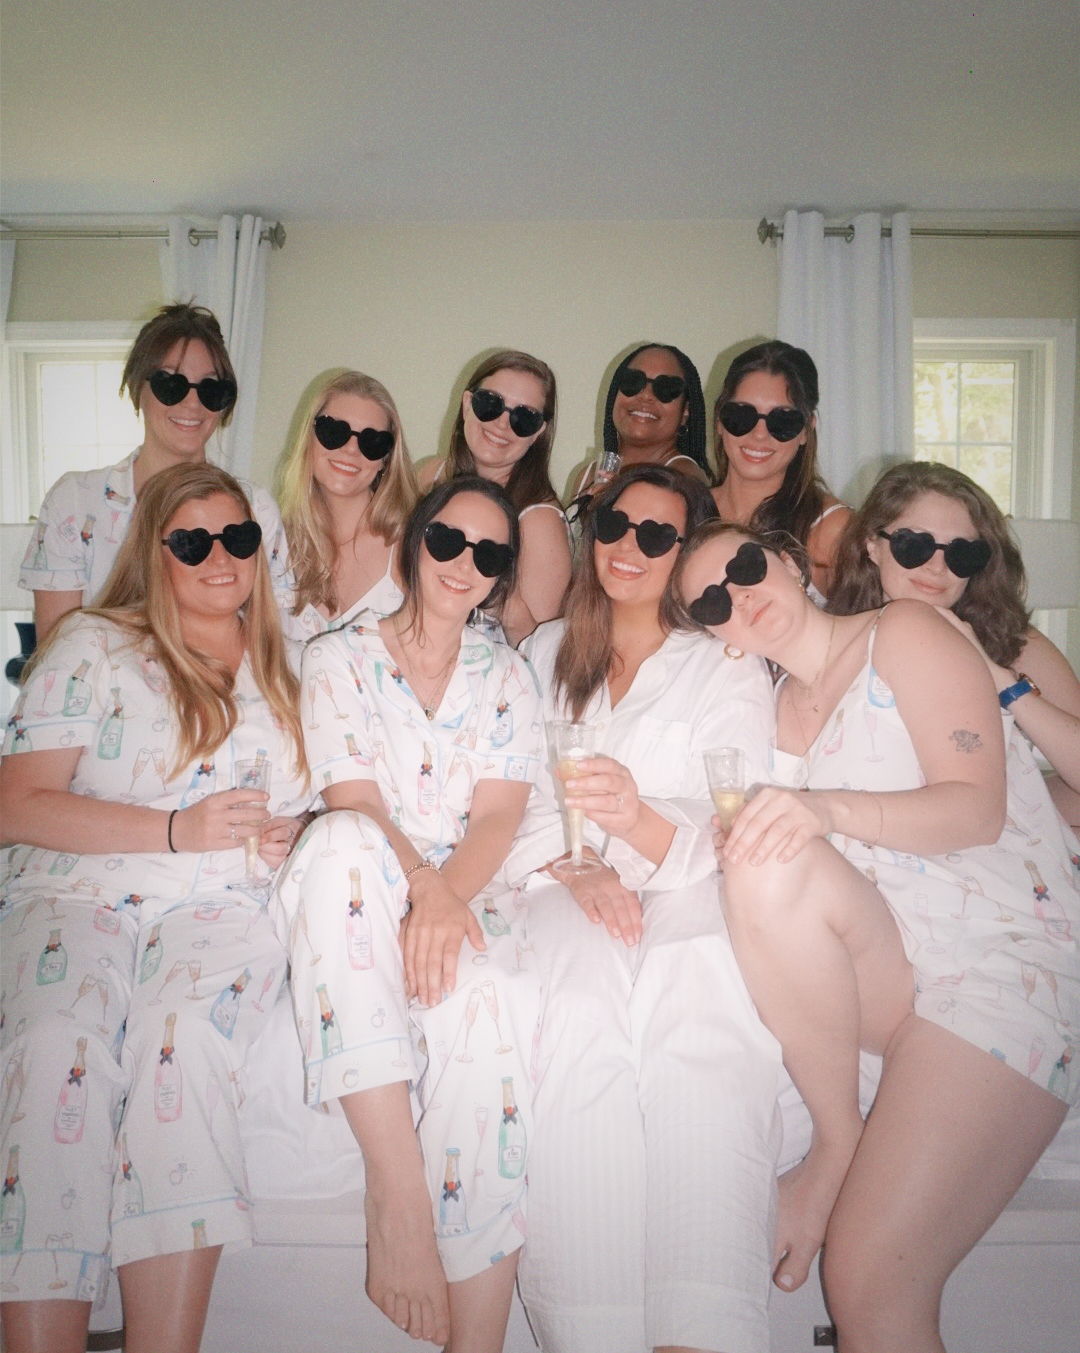 Everything You Need To Host a Coastal Bachelorette Weekend | Cape Cod Bachelorette | Wholesome Bachelorette Ideas | Cape Cad Massachusetts Bachelorette Itinerary | What To Do In Cape Cod for A Bachelorette Party | New England Bachelorette | Coastal Bachelorette Party Theme | Bachelorette Themes | How To Host A Coastal Bachelorette | Bridesmaids In Pajamas | Simply by Simone